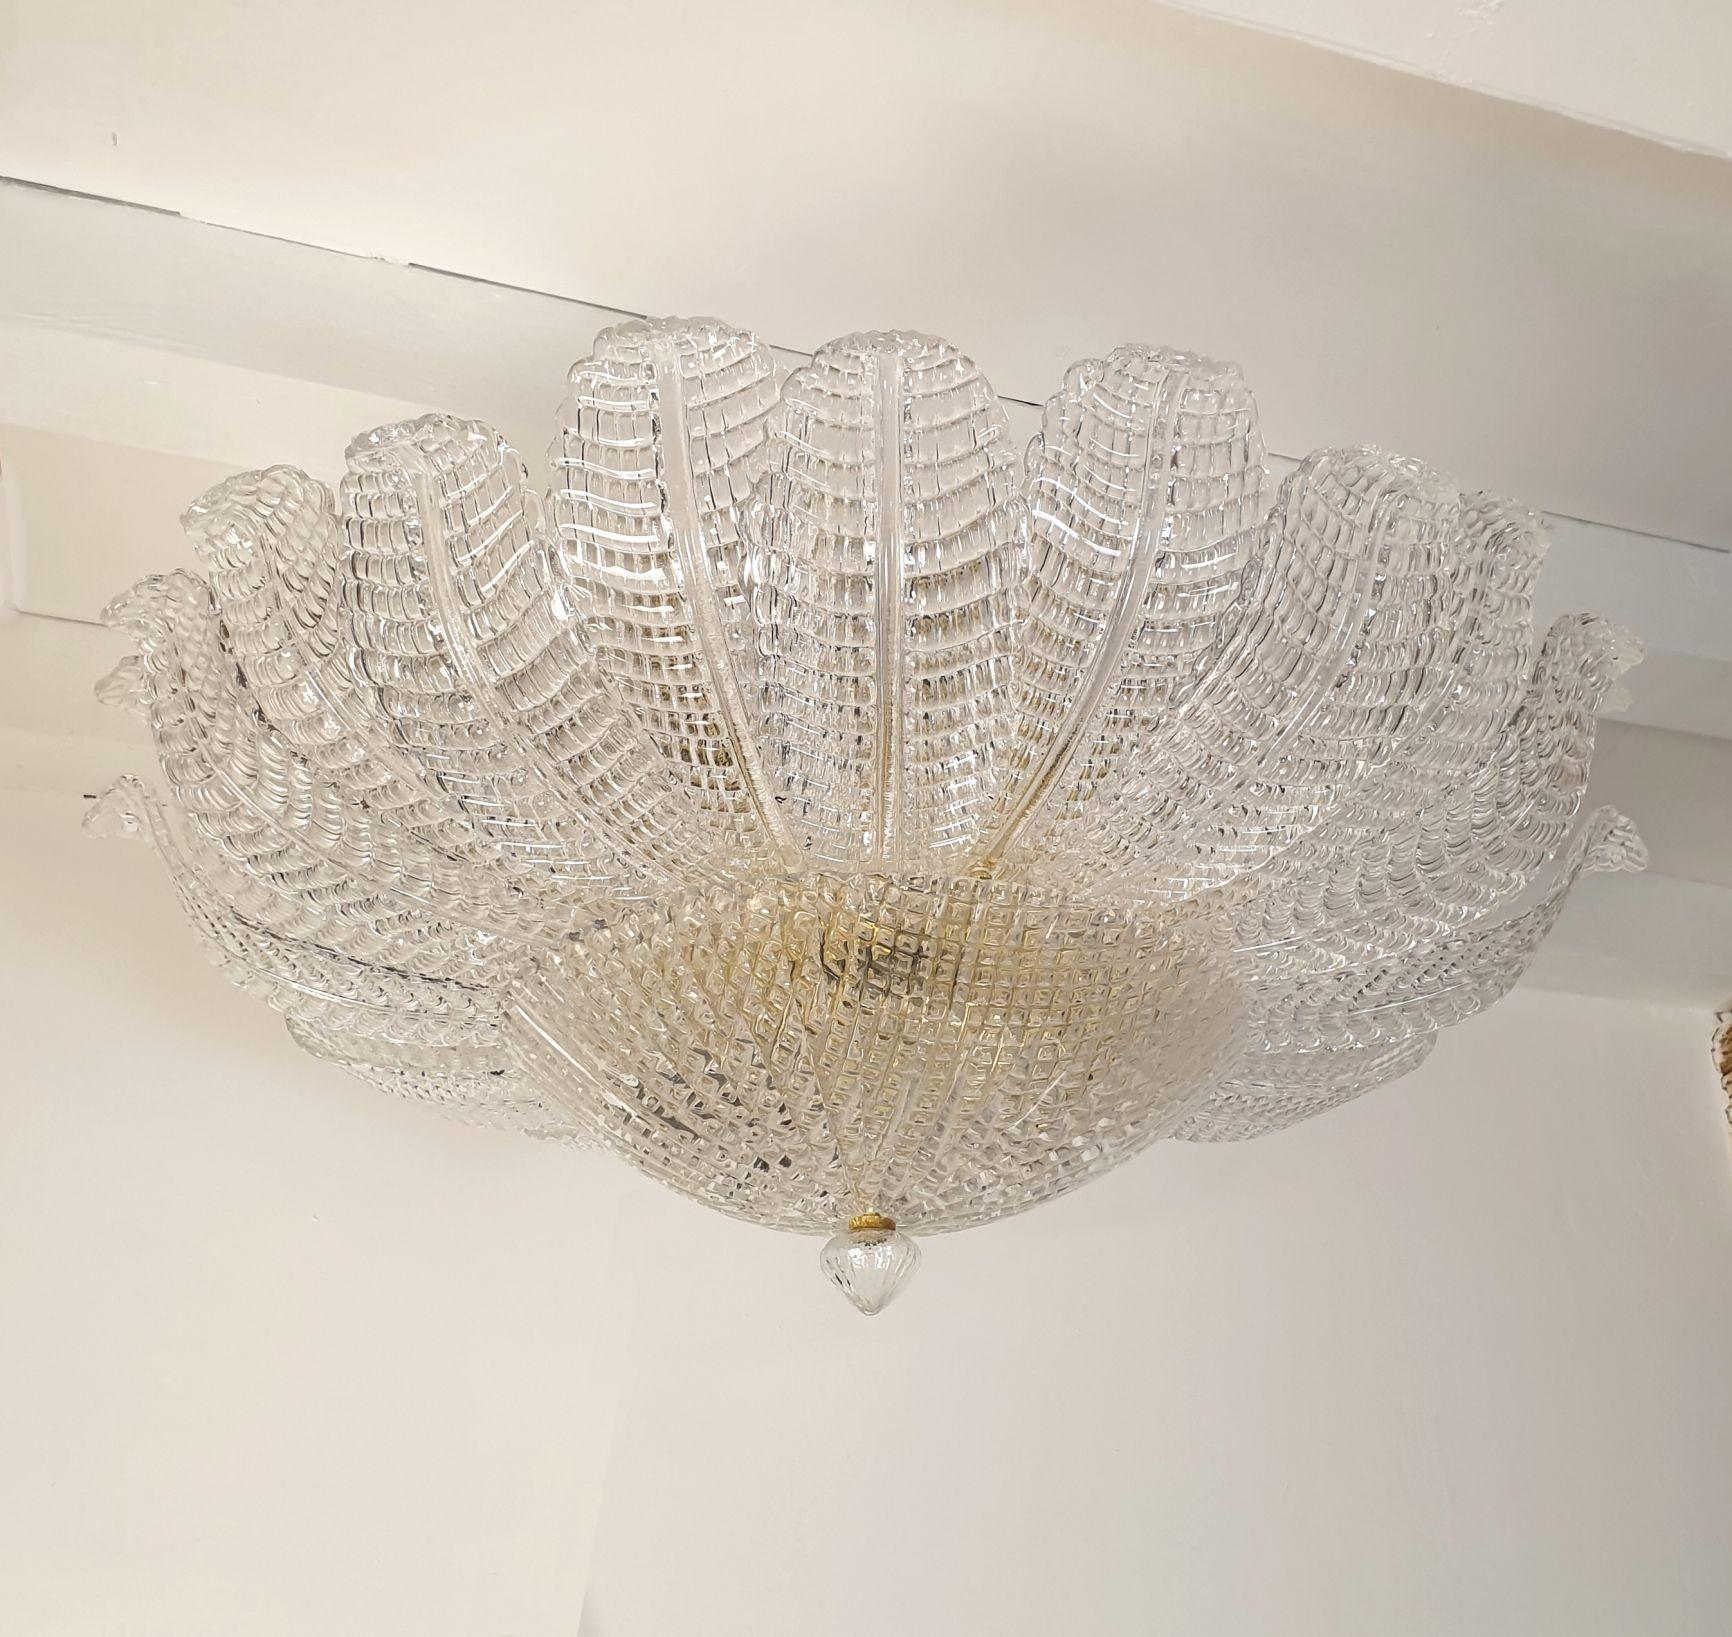 Large Mid-Century Modern Murano glass leaves chandelier, Barovier style, Italy 1970s.
The large chandelier is made of clear Murano glass leaves, with a grid pattern, making them translucent through the light.
This pattern is typical from the